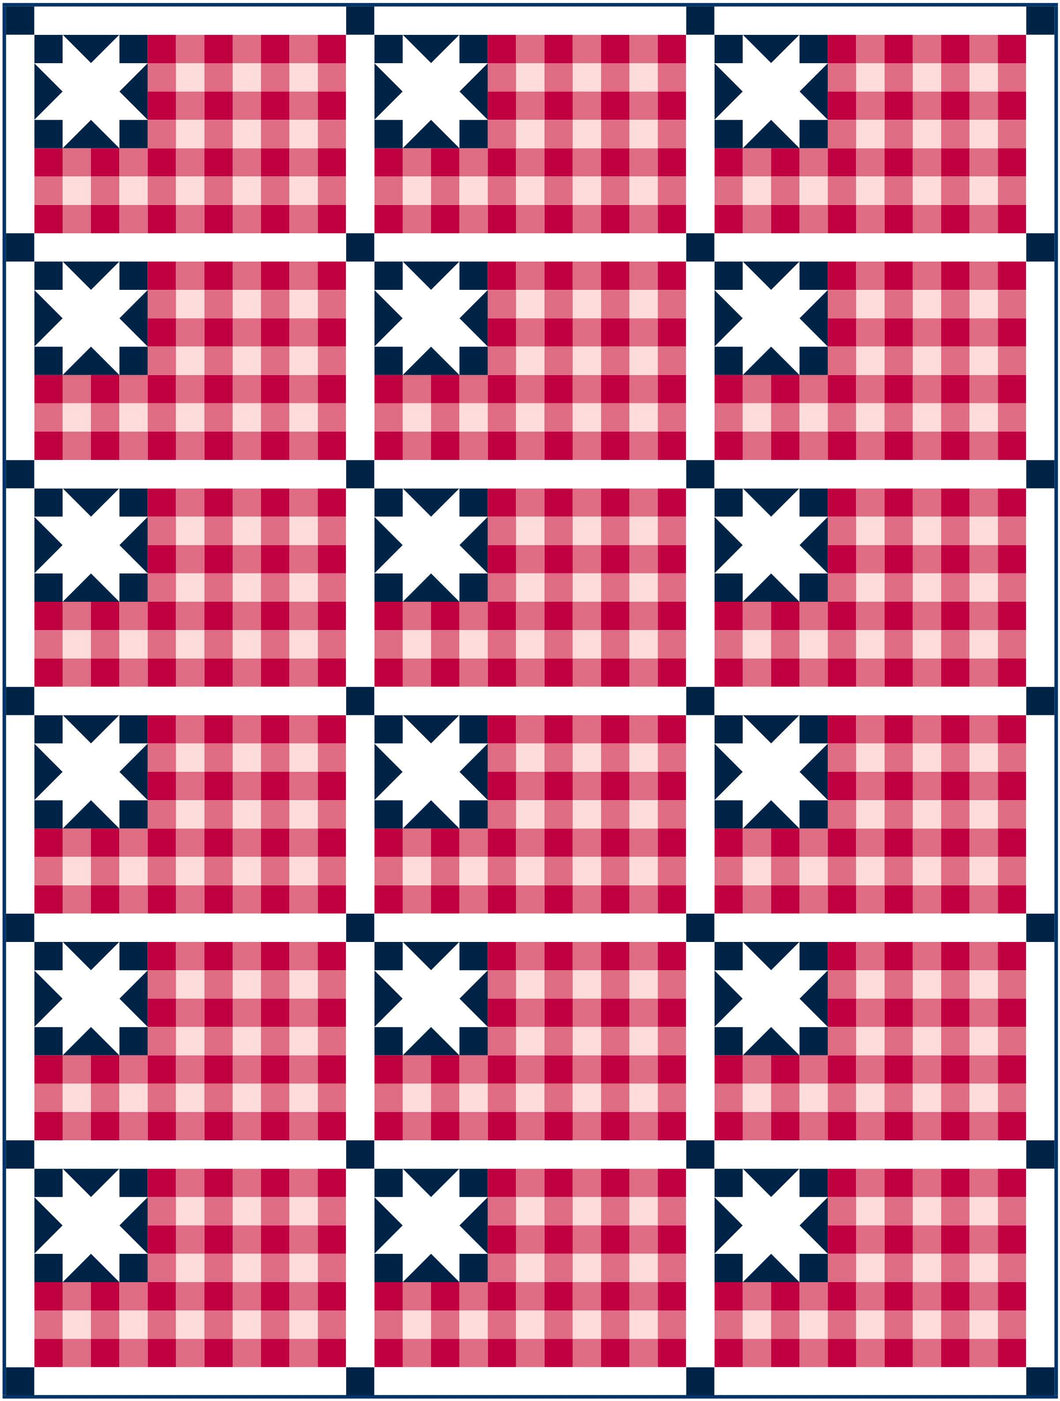 Plaid Flag Solid Quilt Kit by Sewcial Stitch 6 size options-Navy Blue